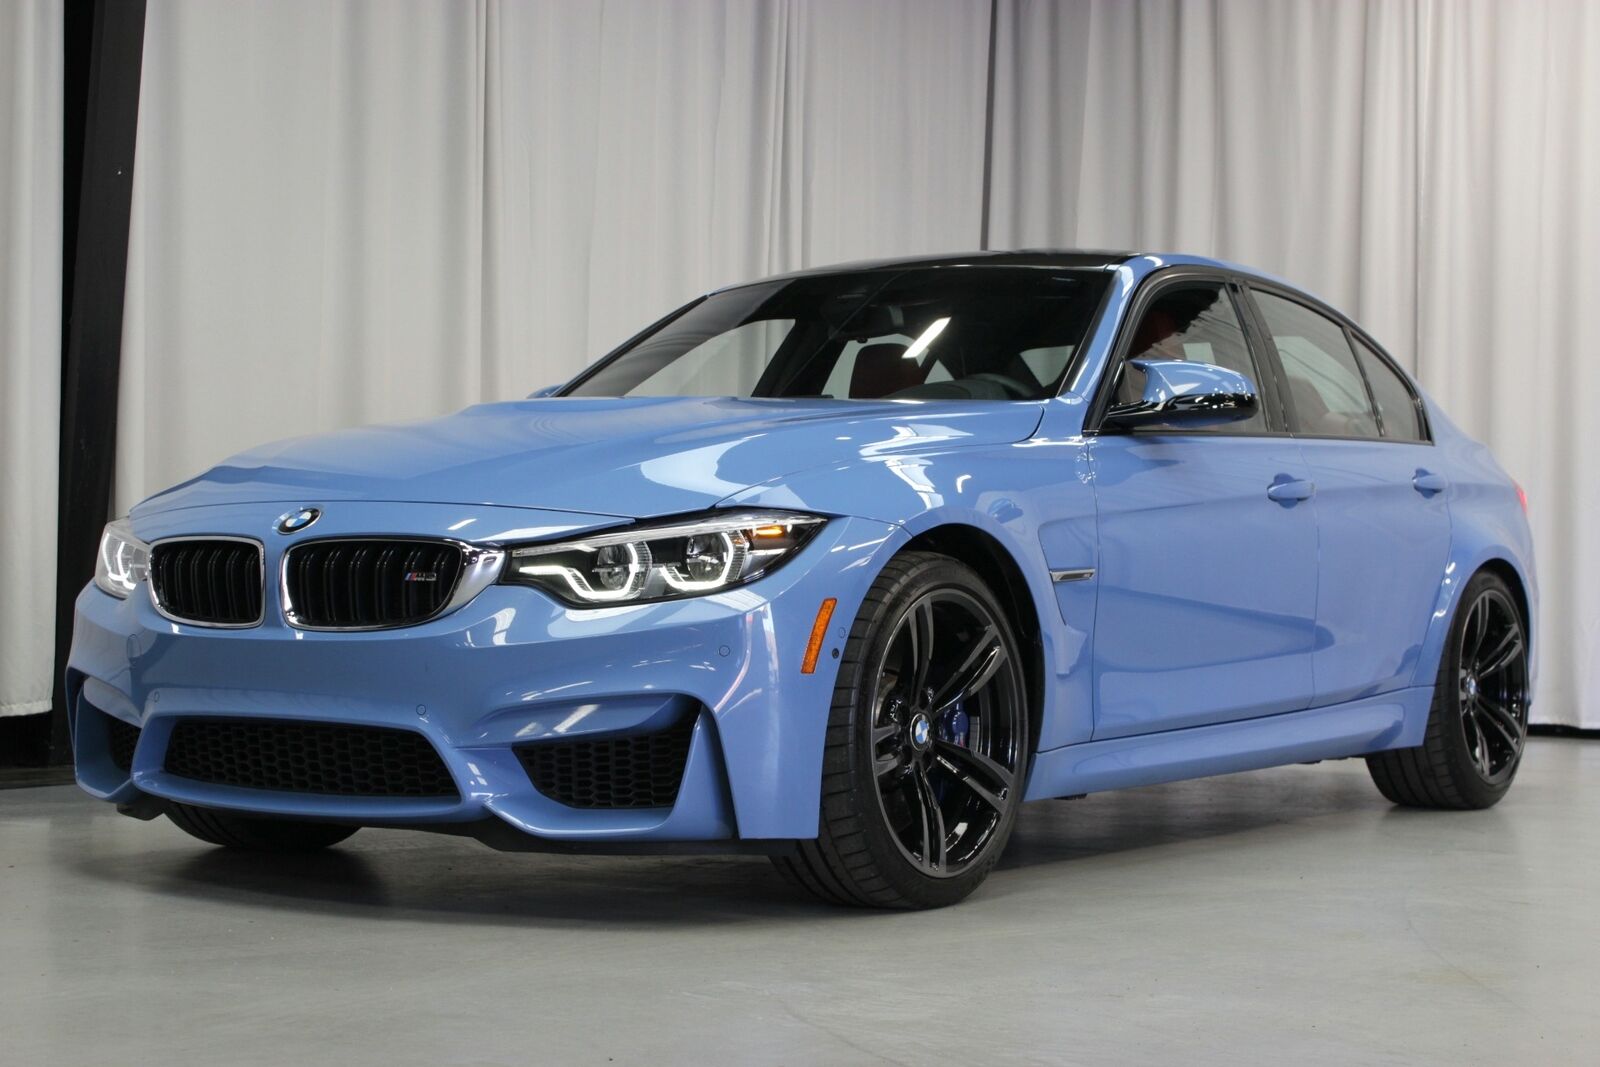 Double Take: 2018 BMW M3 and 2015 M4 Convertible